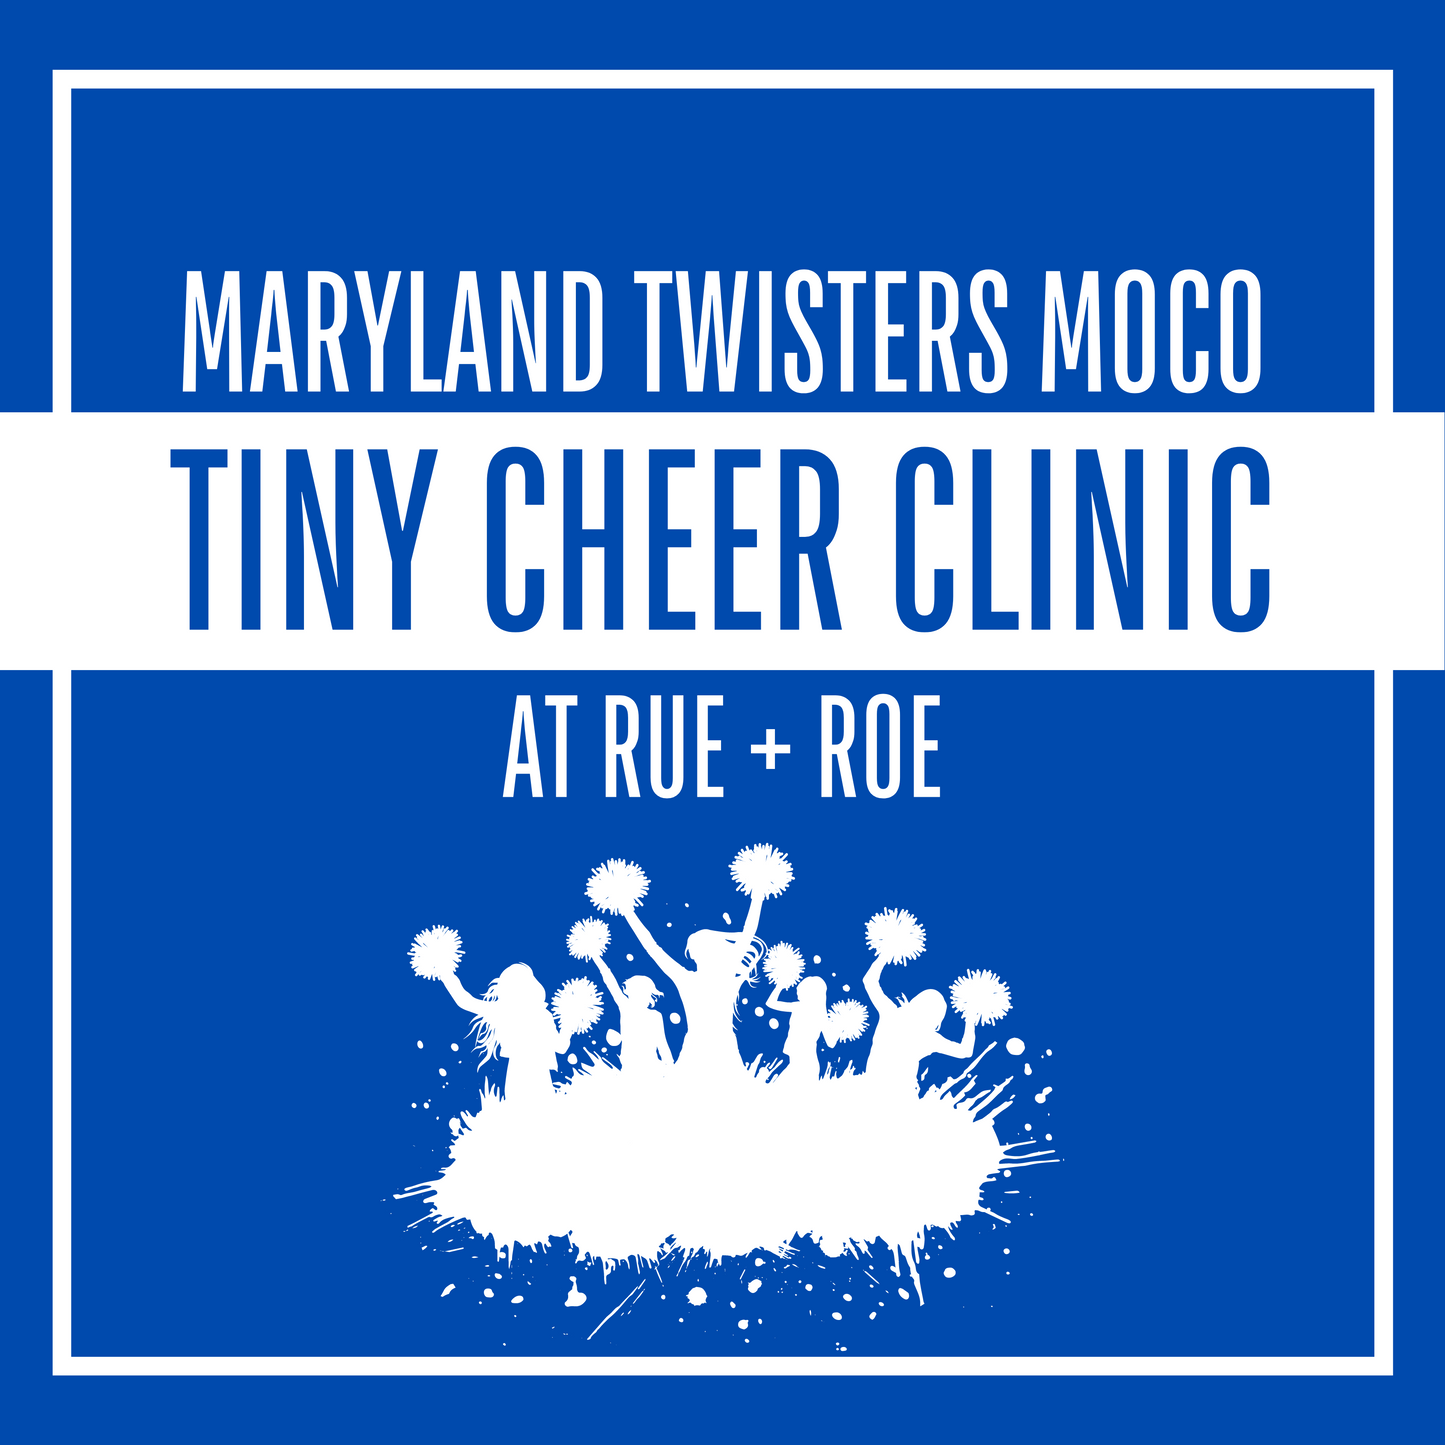 Tiny Cheer Clinic with Maryland Twisters Moco